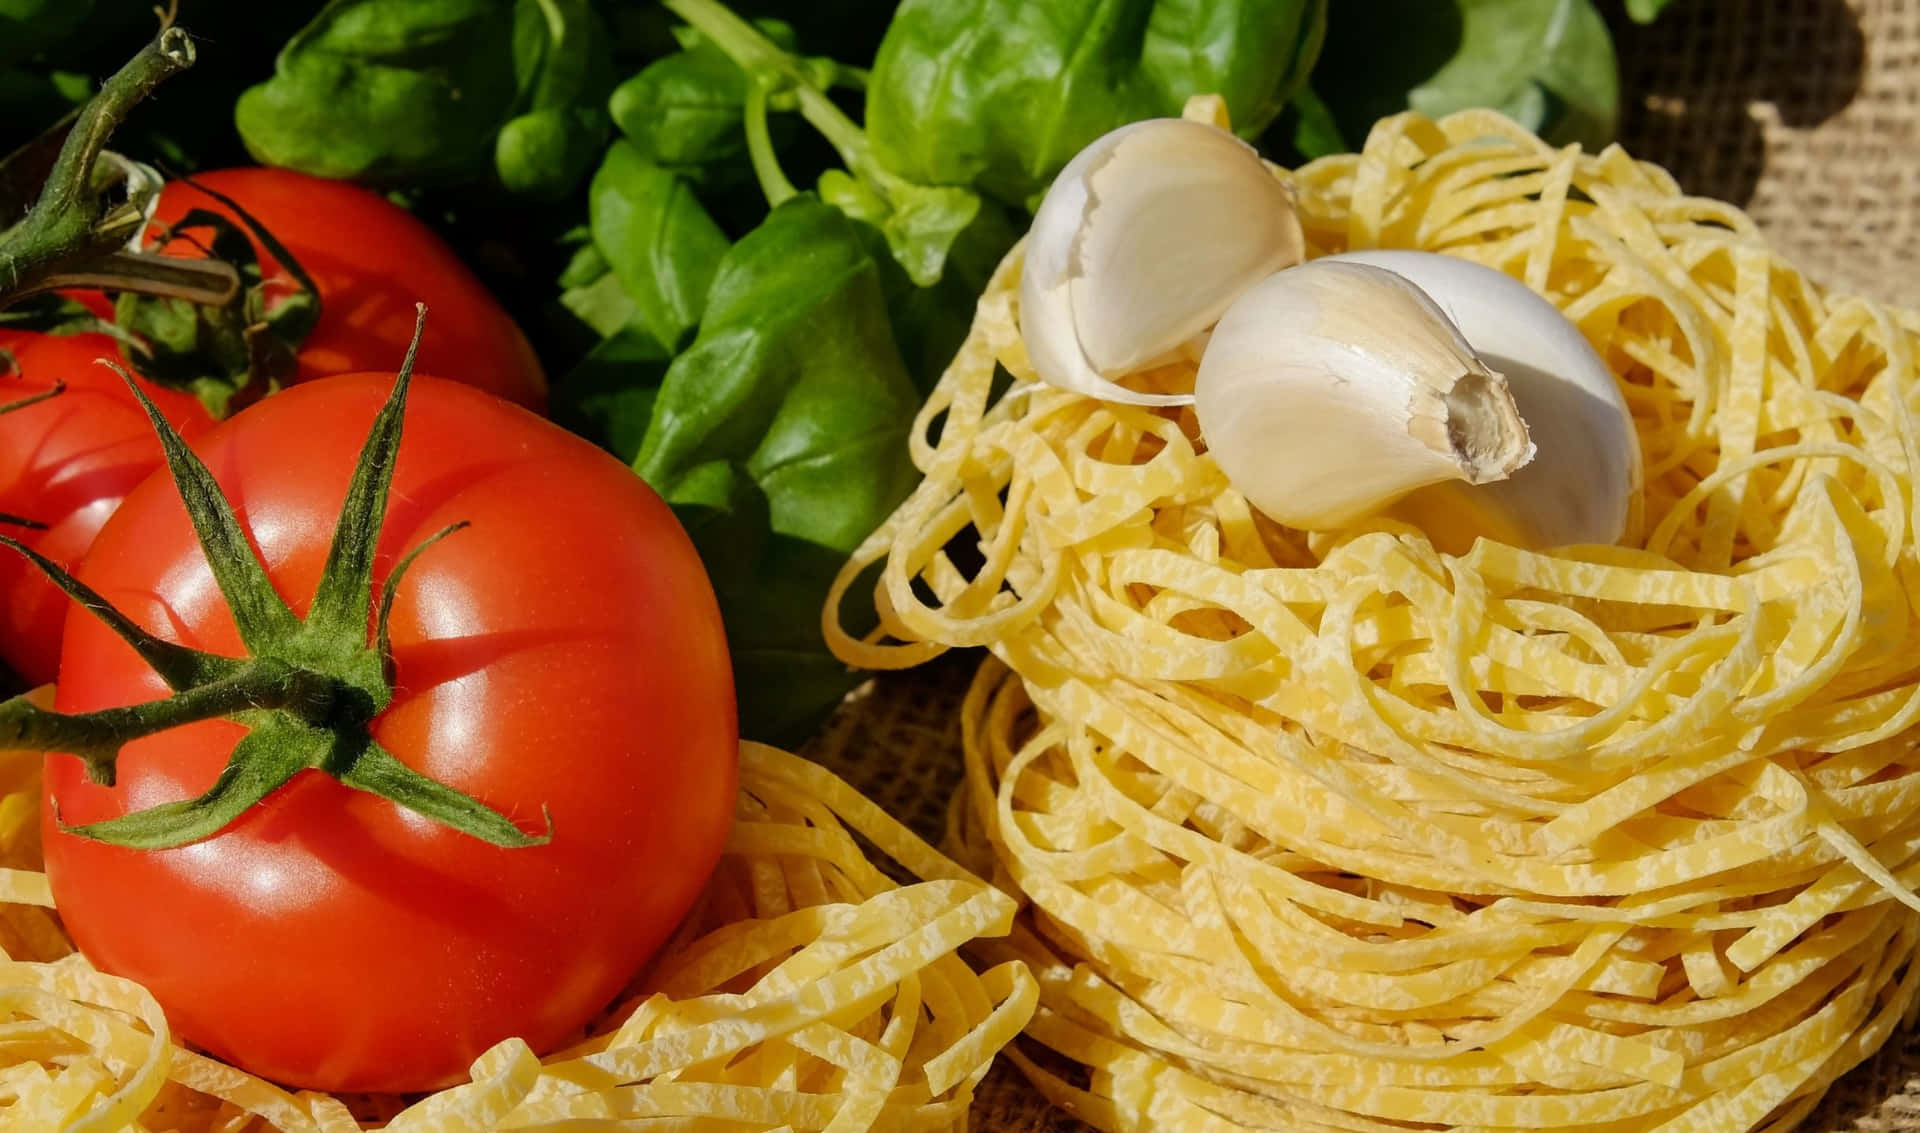 A Bowl Of Pasta With Tomatoes, Garlic And Basil